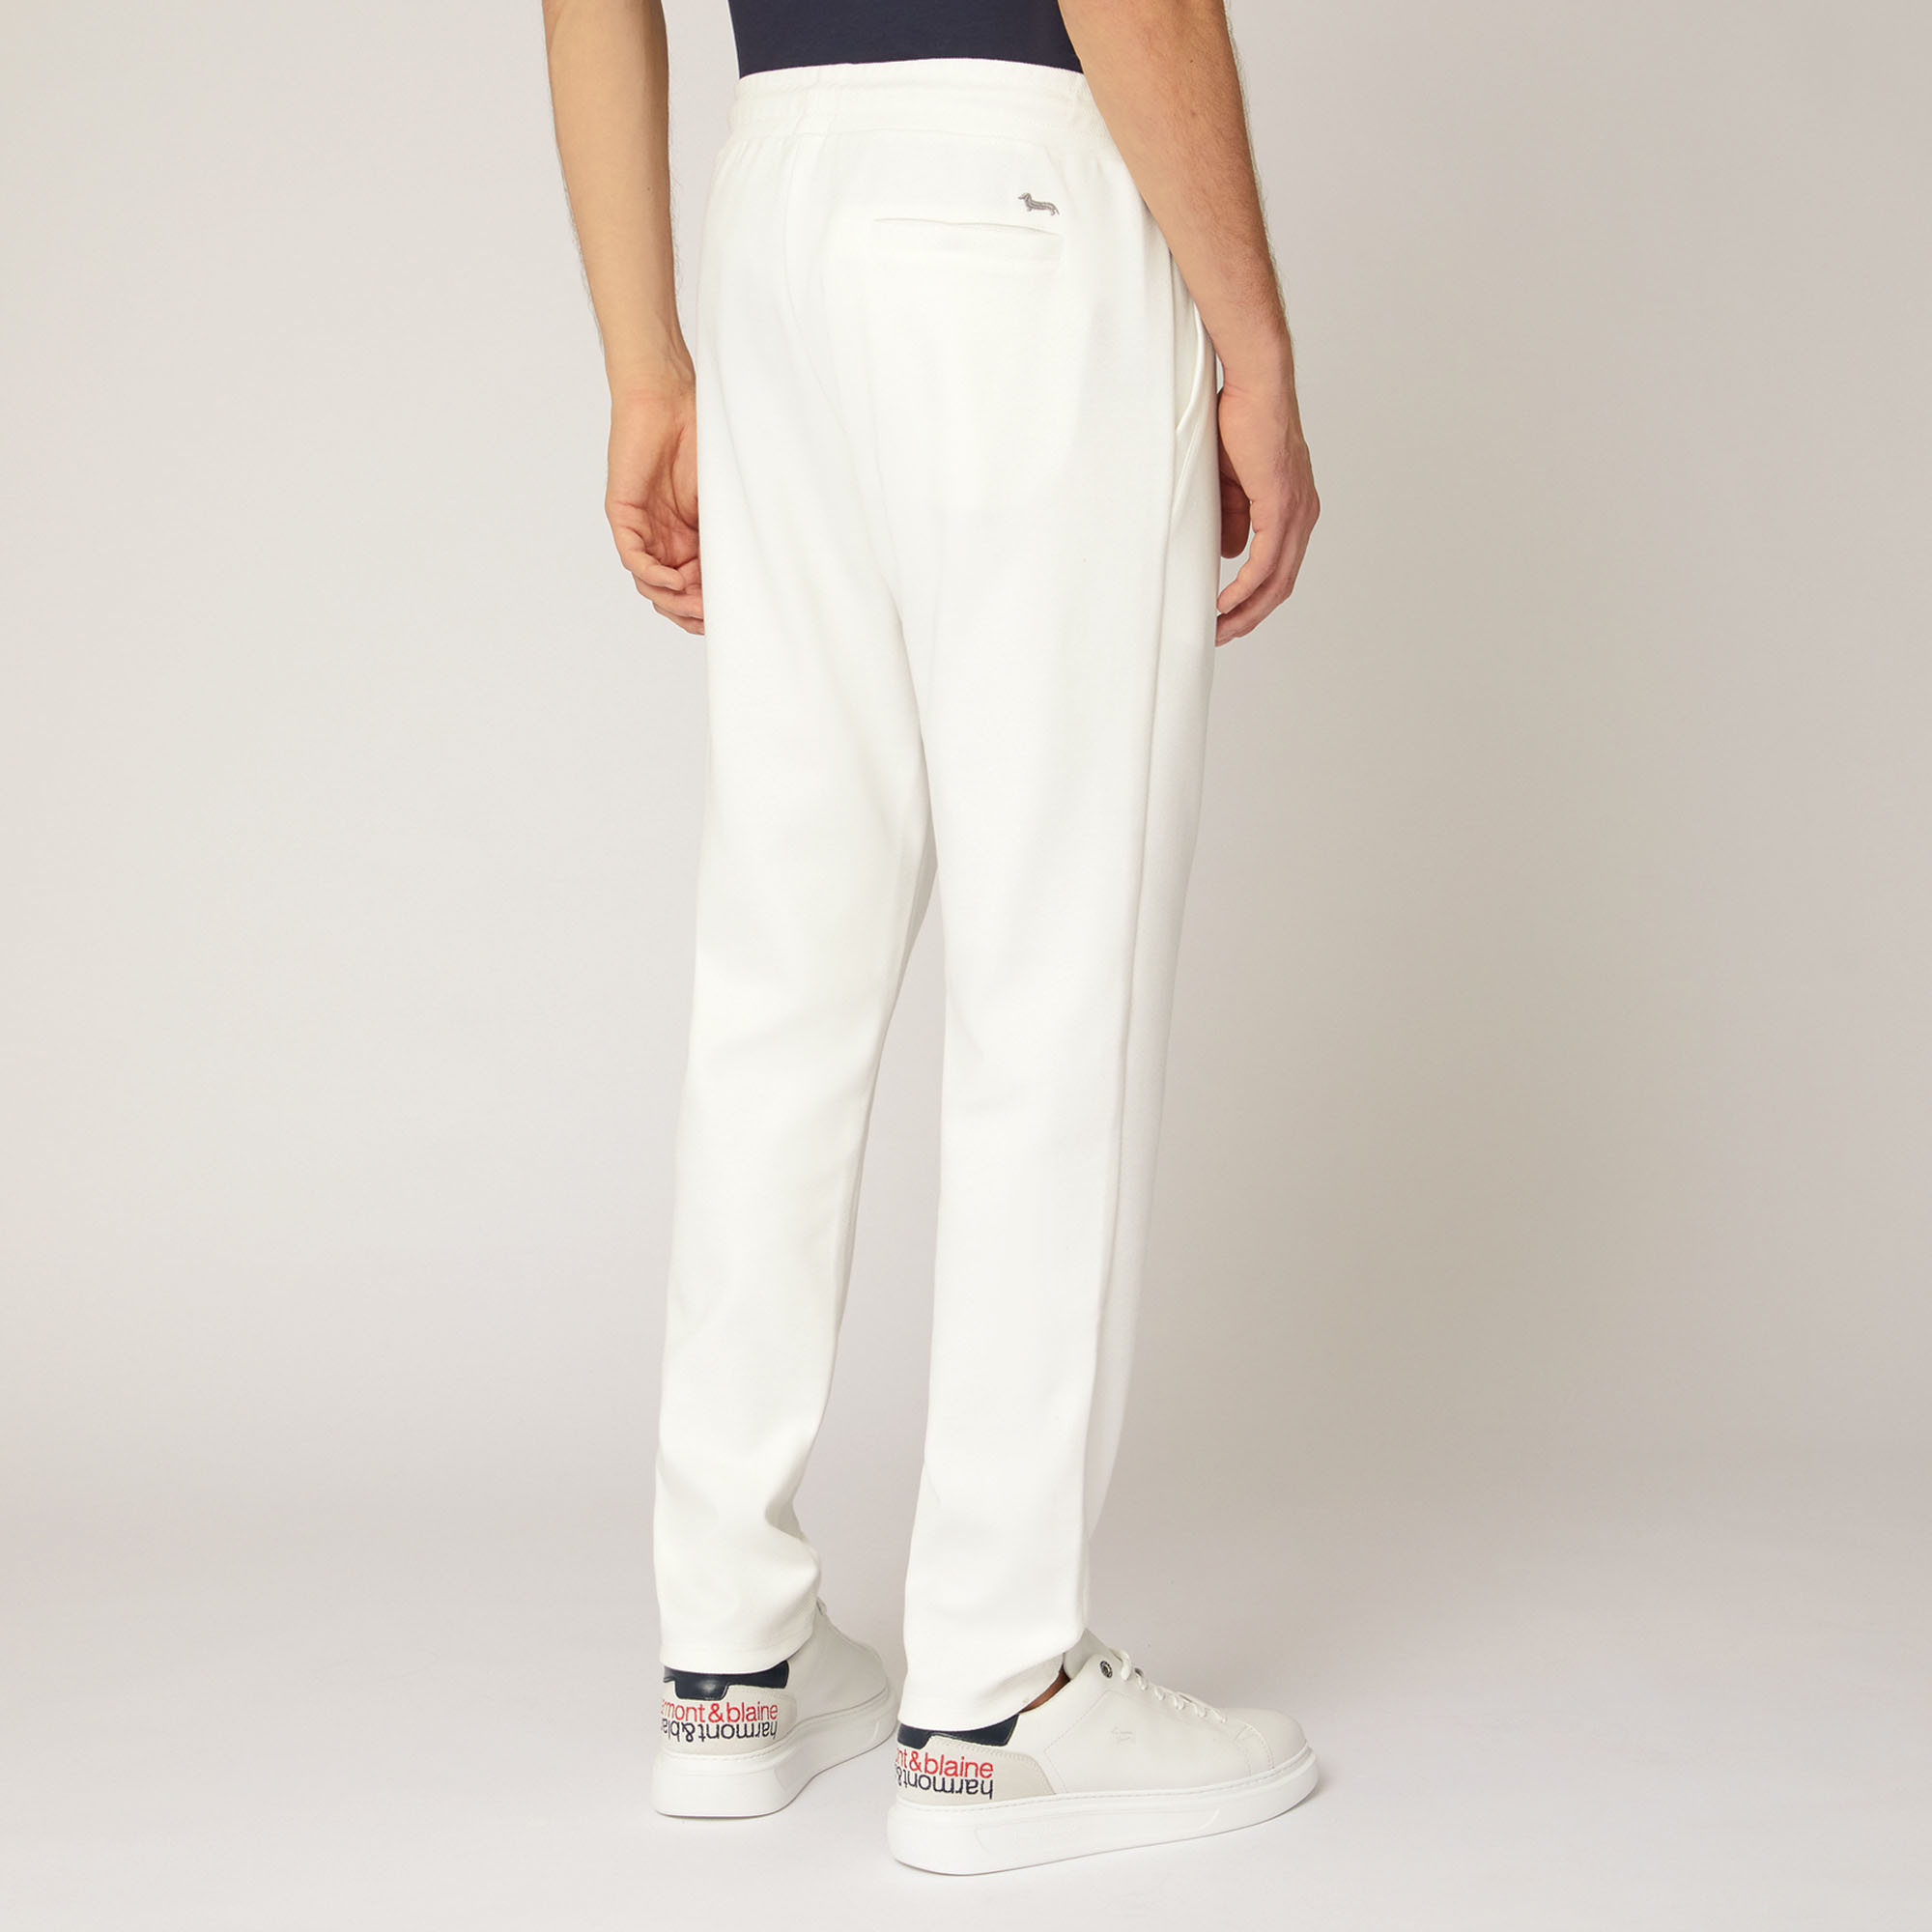 Stretch Cotton Pants with Back Pocket, White, large image number 1